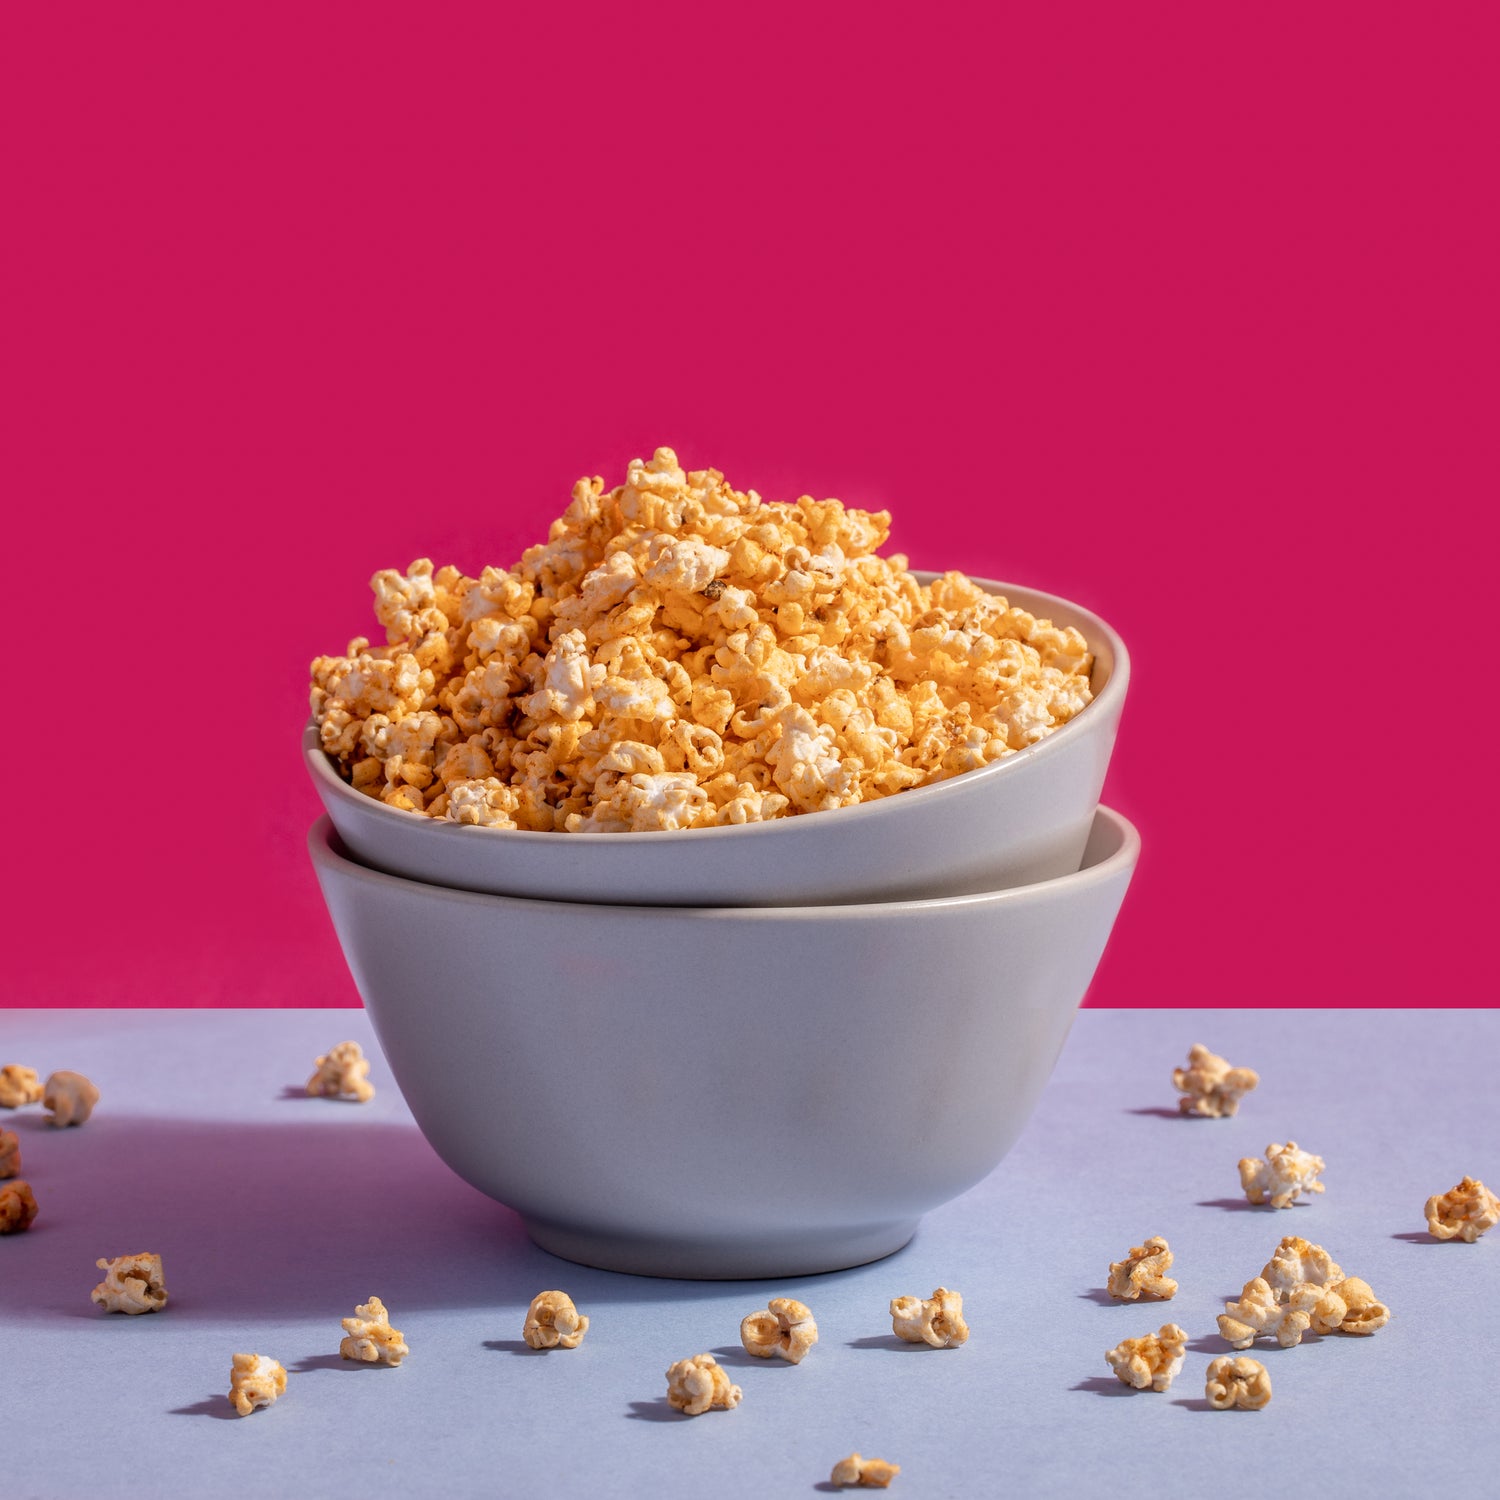 Masala pops in a white bowl against a pink background